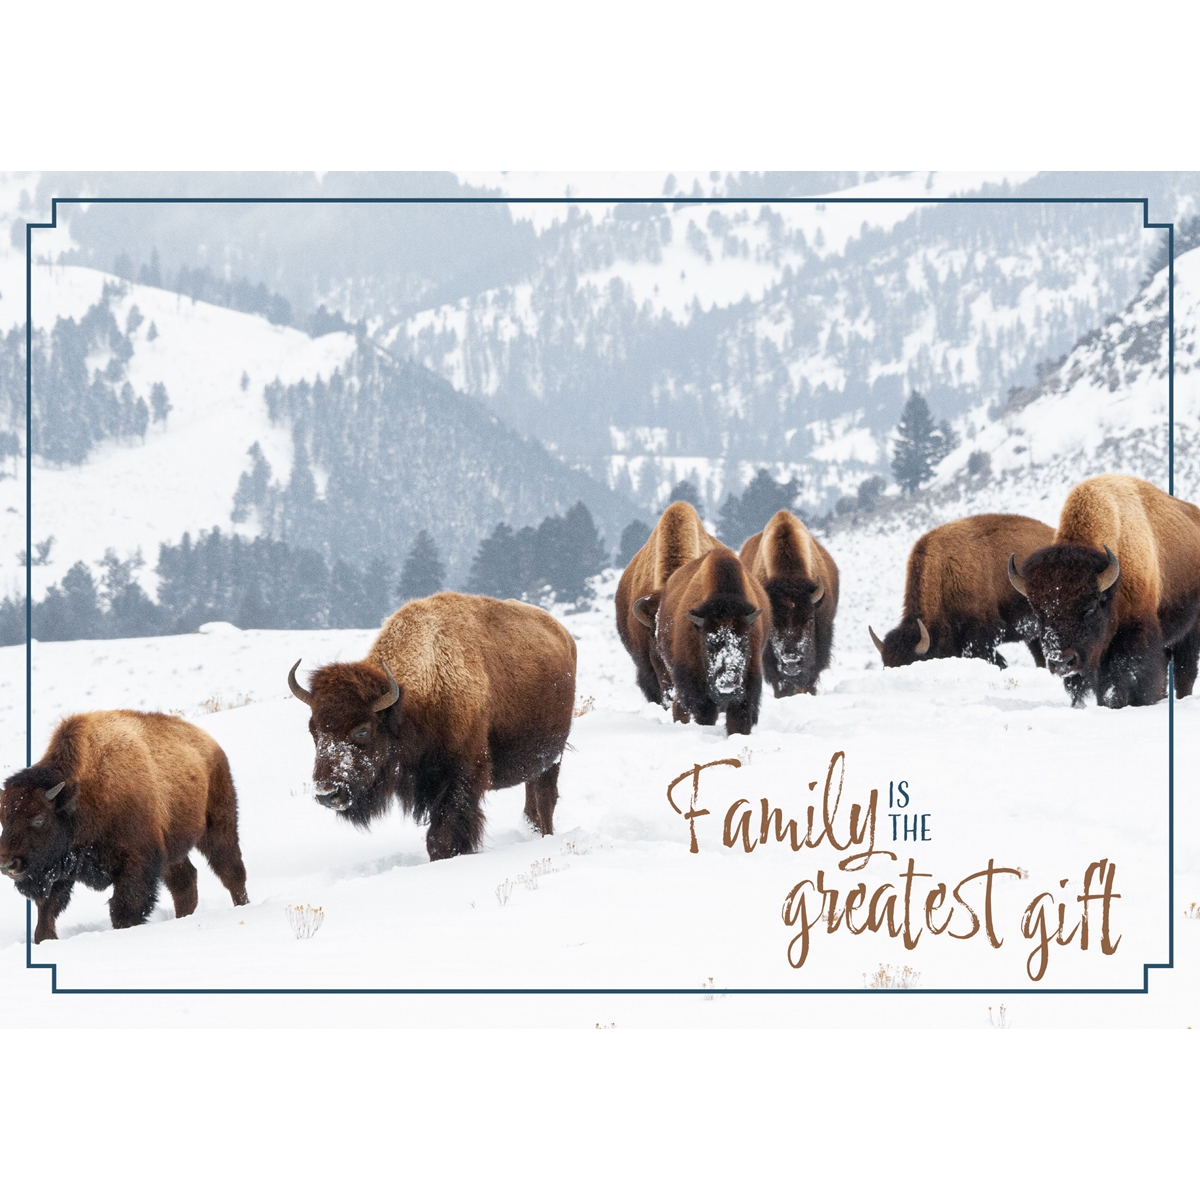 Bison in Yellowstone Cards - Standard